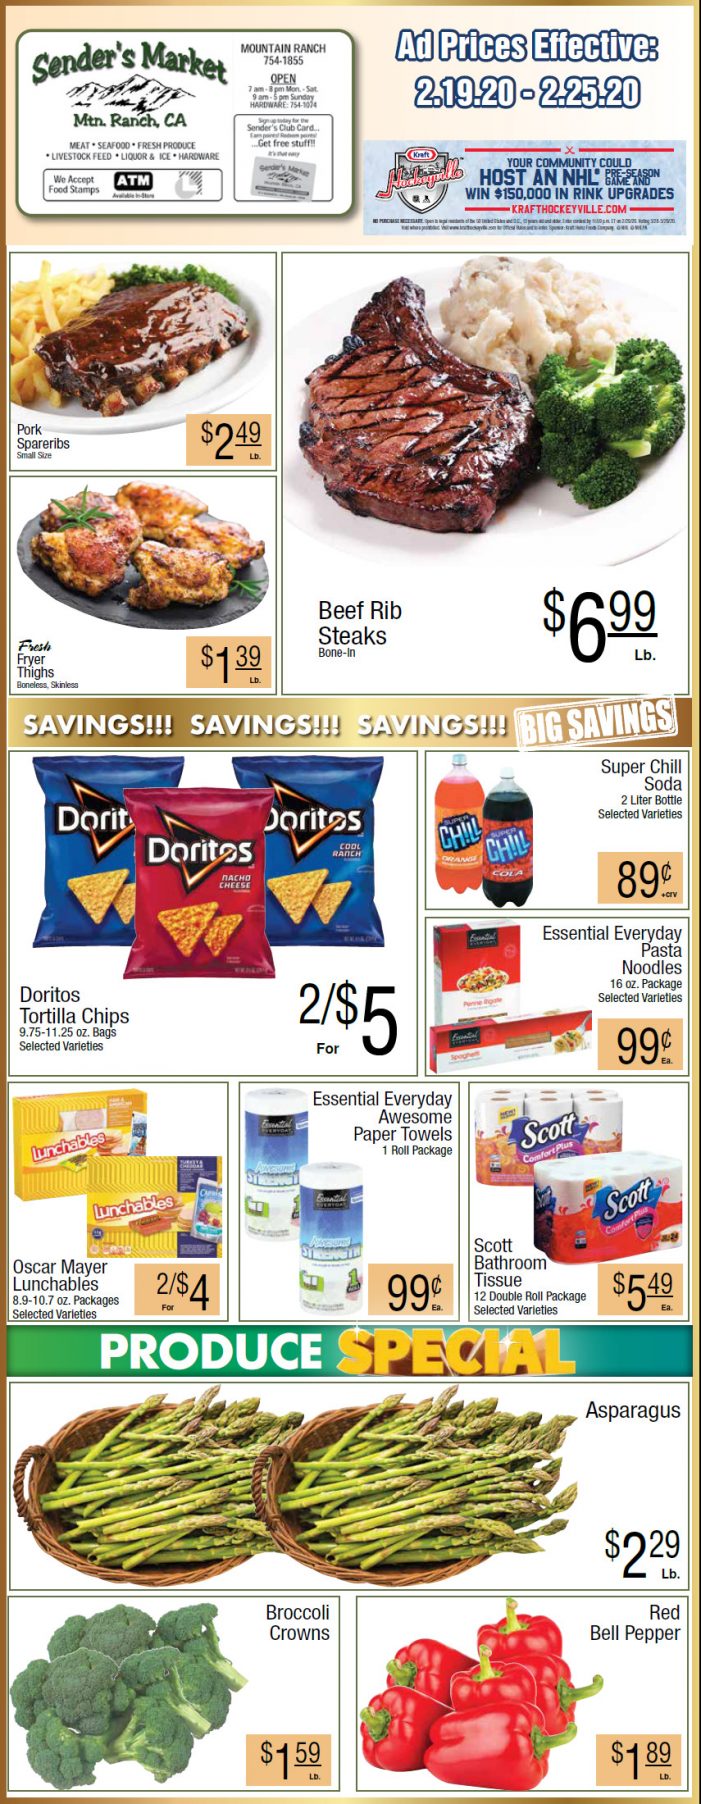 Sender’s Market’s Weekly Ad & Grocery Specials Through February 25th